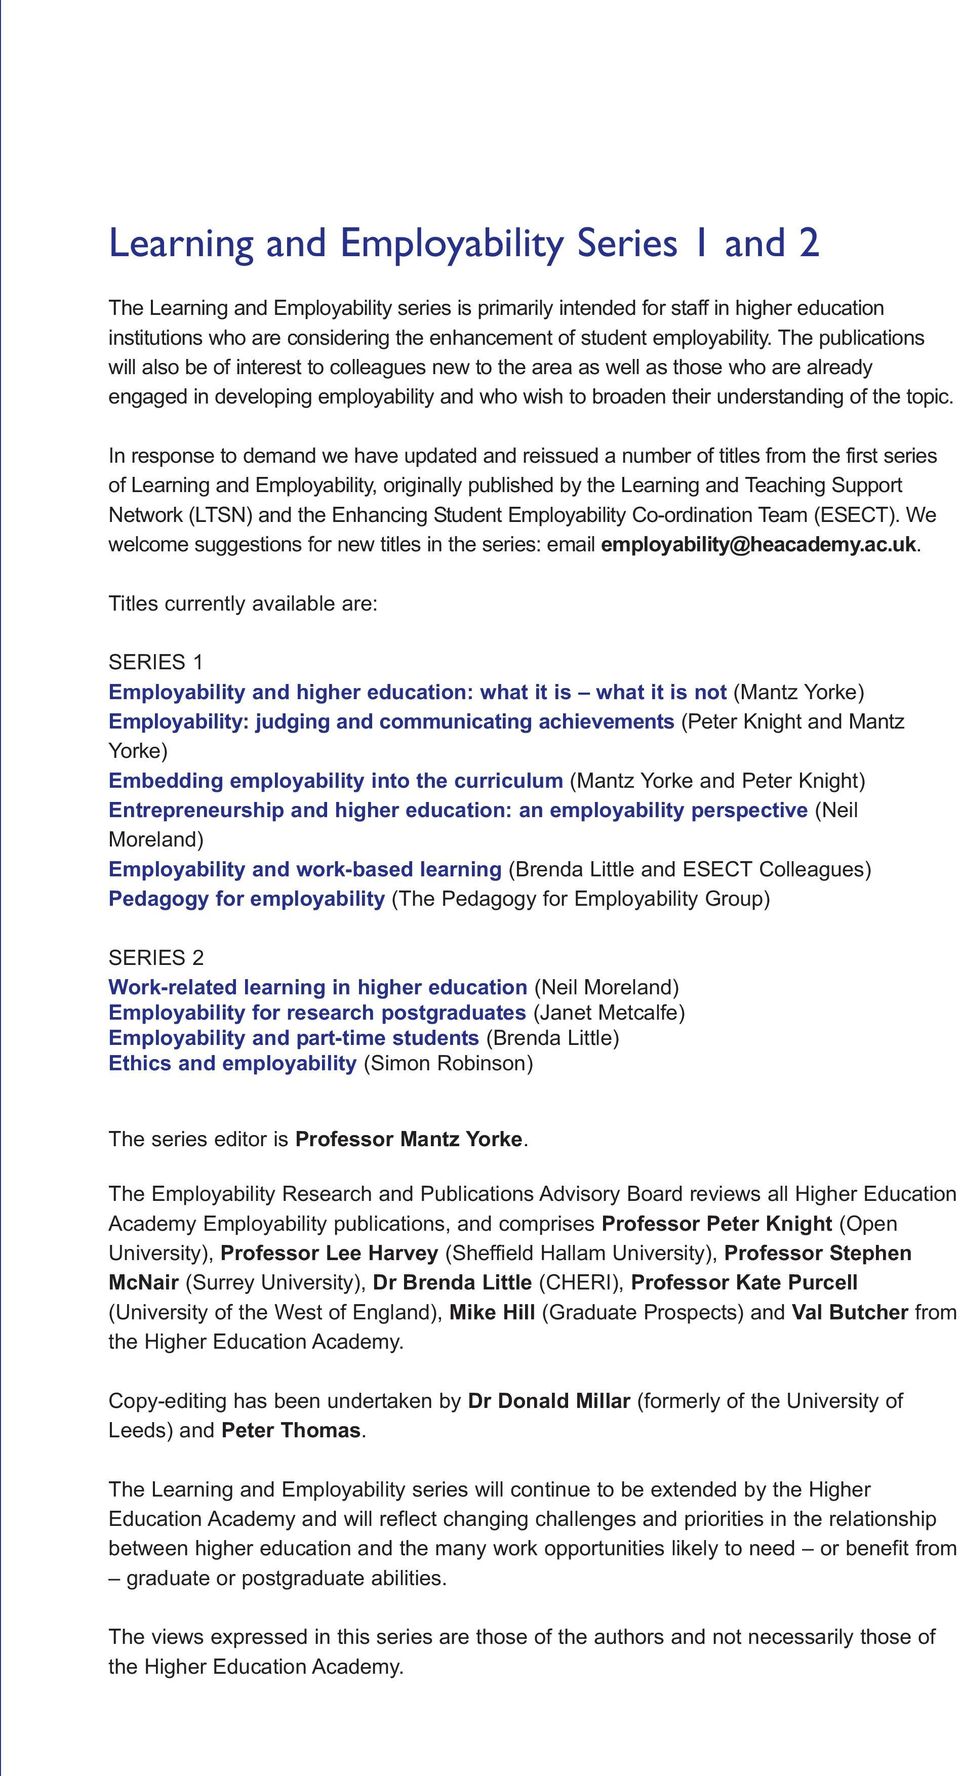 The publications will also be of interest to colleagues new to the area as well as those who are already engaged in developing employability and who wish to broaden their understanding of the topic.